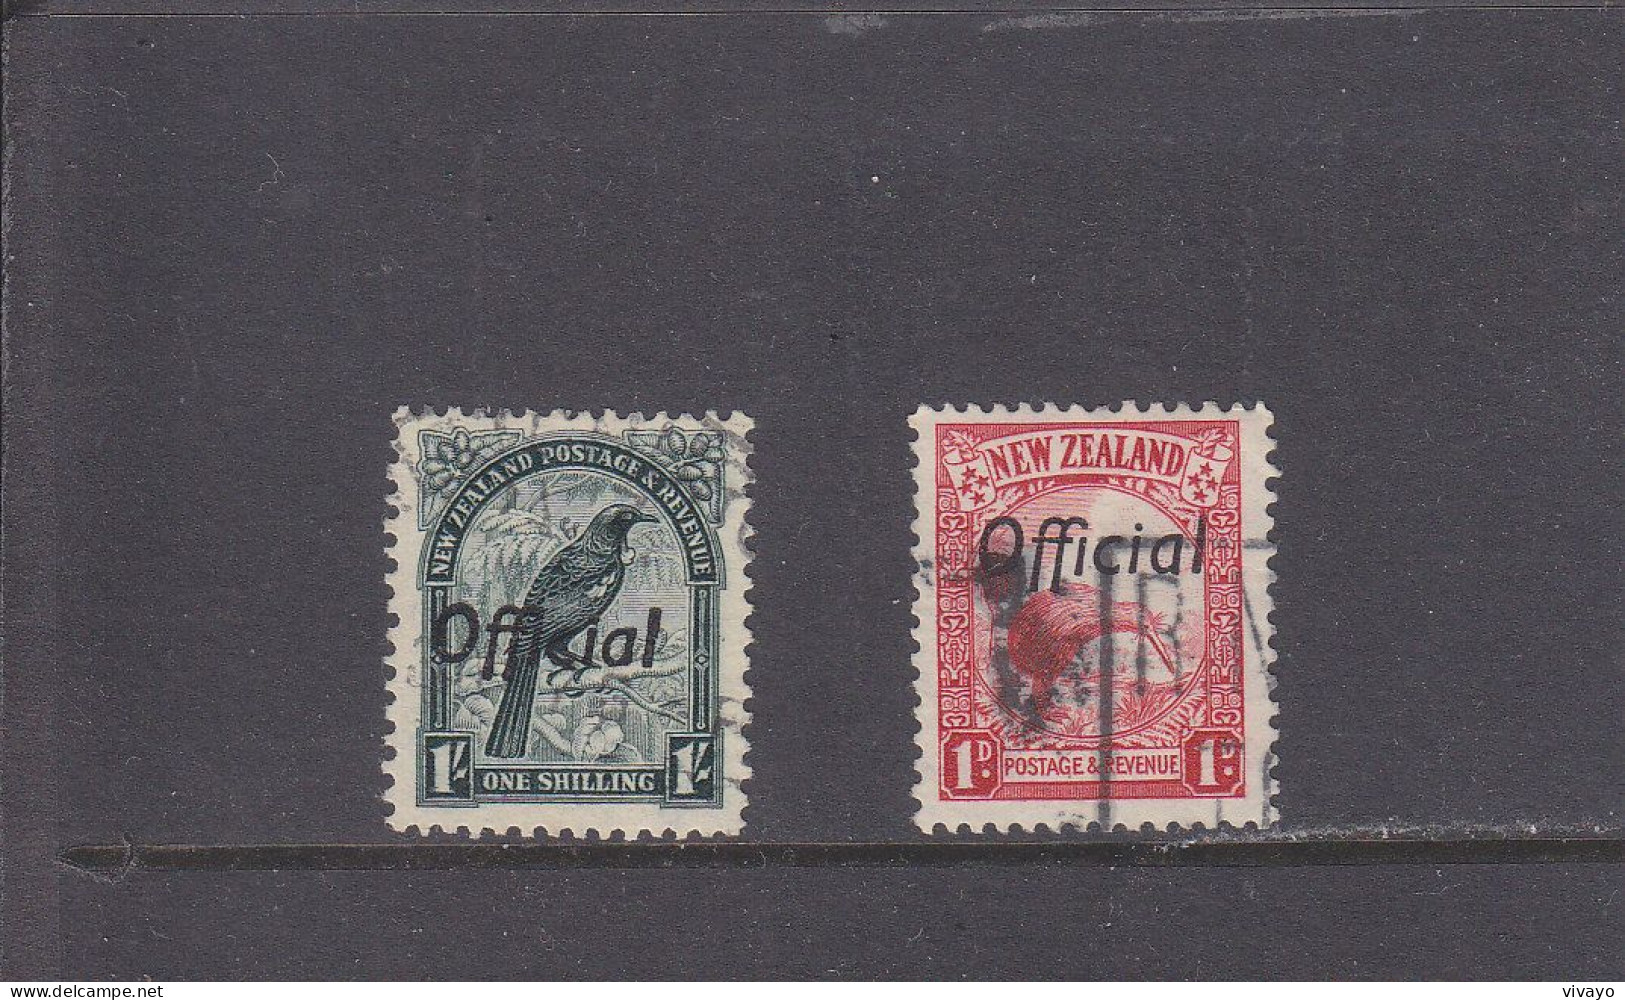 NEW ZEALAND - O / FINE CANCELLED - 1936/1937 - OFFICIAL STAMPS, TUI BIRD, KIWI - Yv. Srv. 70, 72 - Mi. Di. 38, 41 - Used Stamps